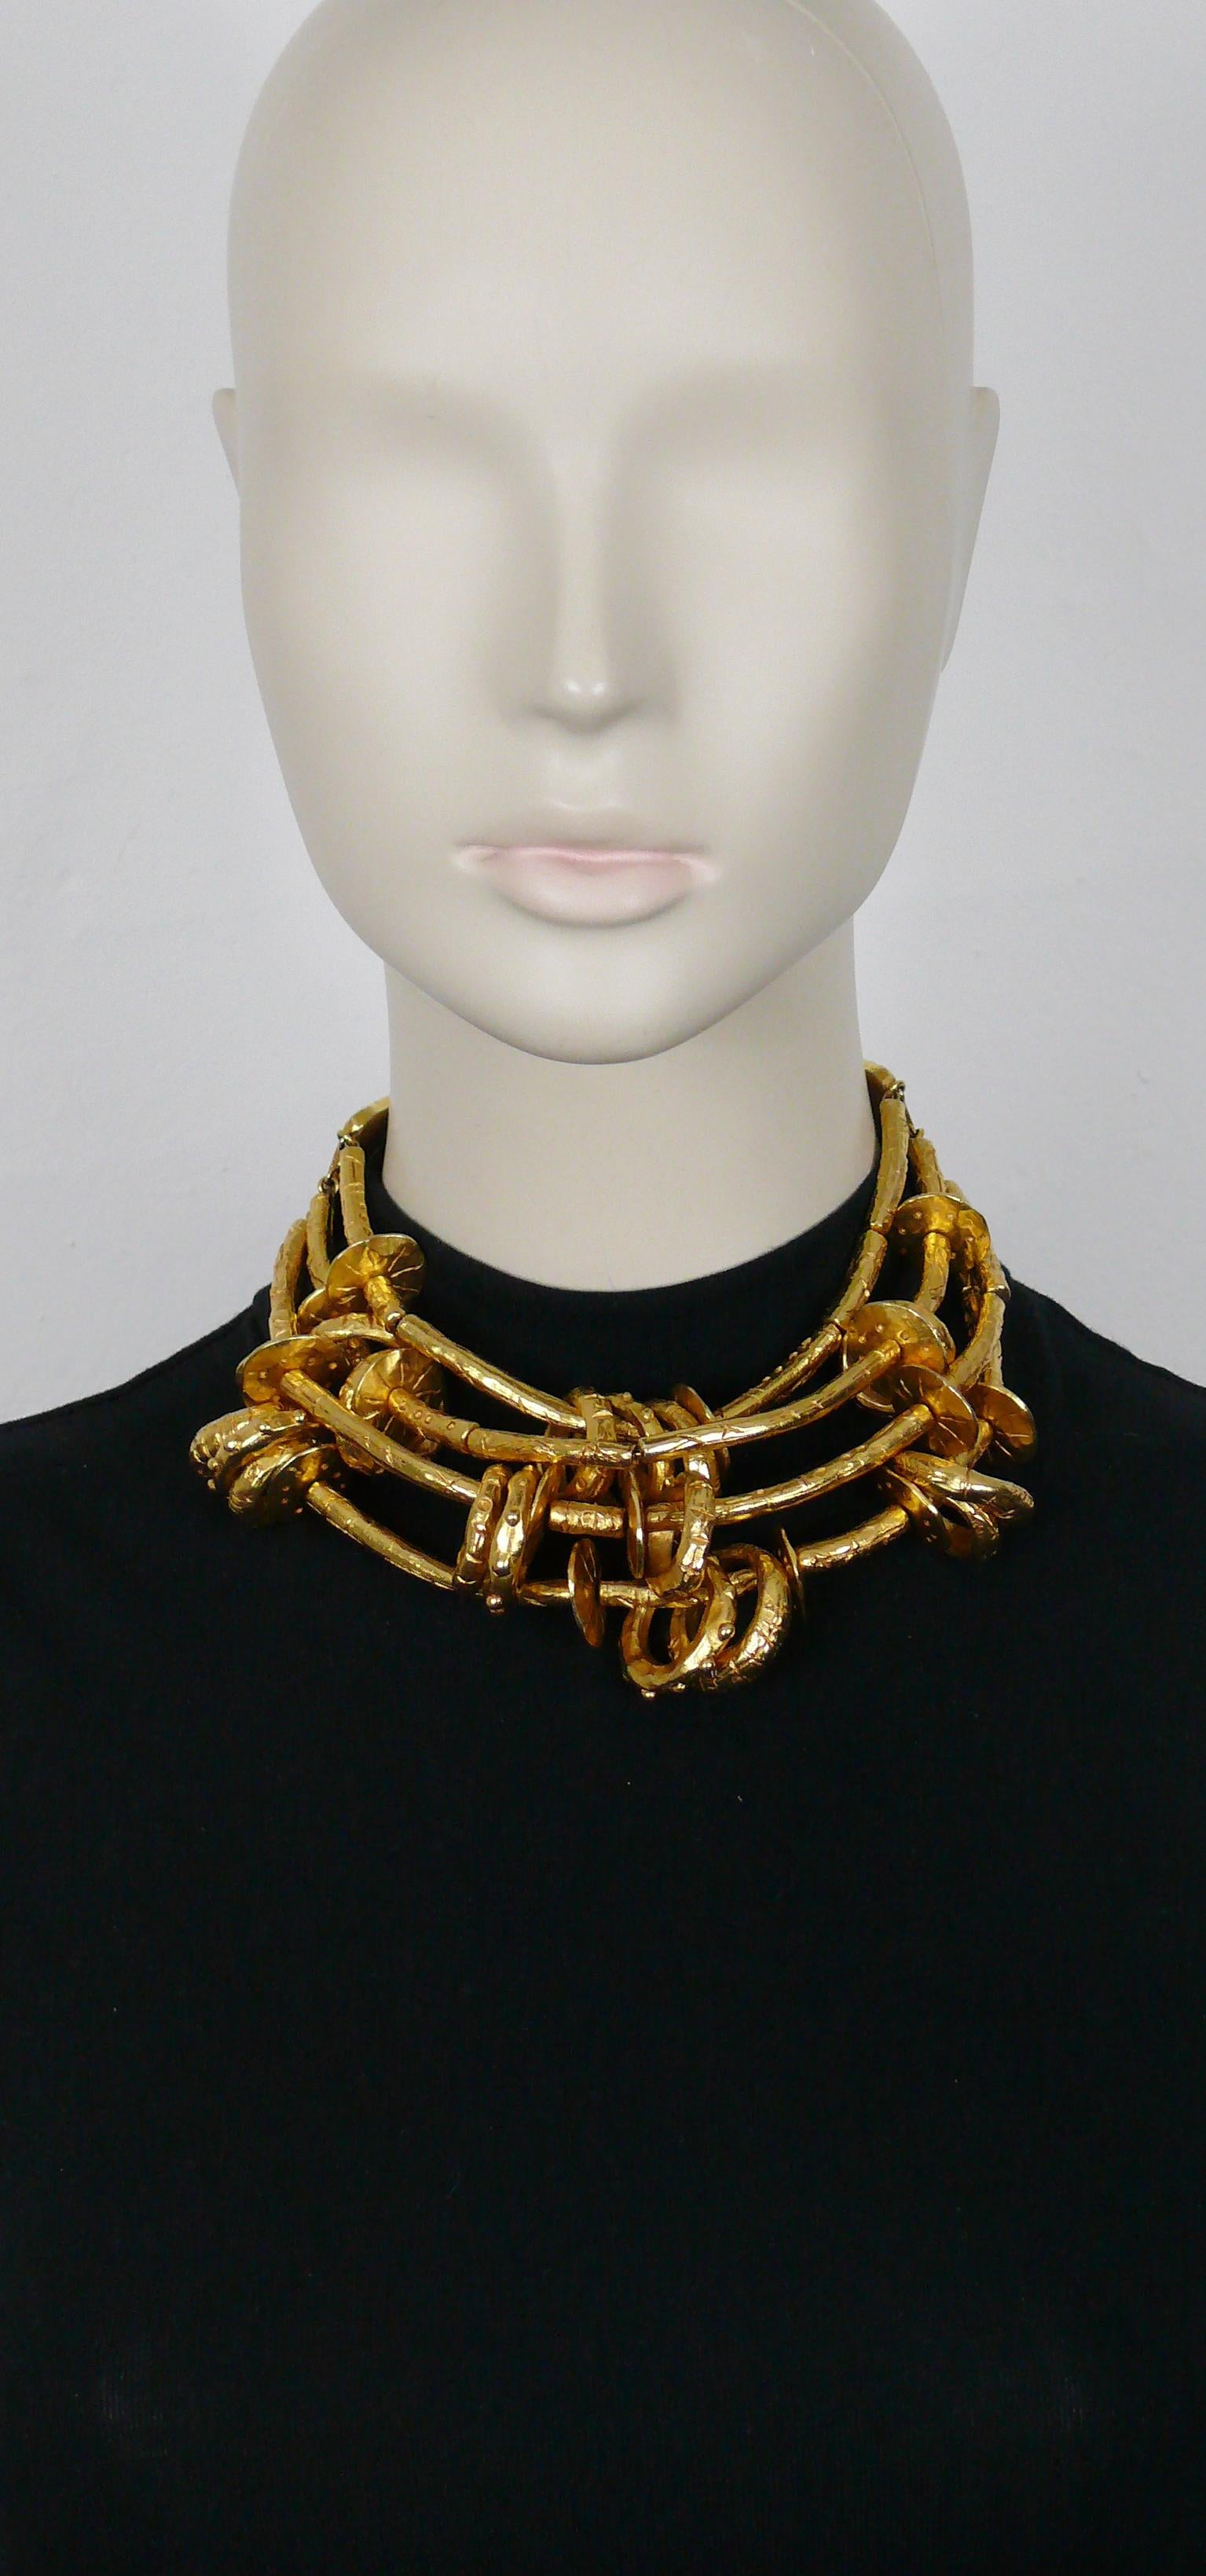 CHRISTIAN LACROIX vintage rare massive ethnic tribal inspired four strands gold tone choker necklace featuring scarified links and rings. Both ends are made of deep red studded leather embellished with orange resin cabochon.

Hook clasp